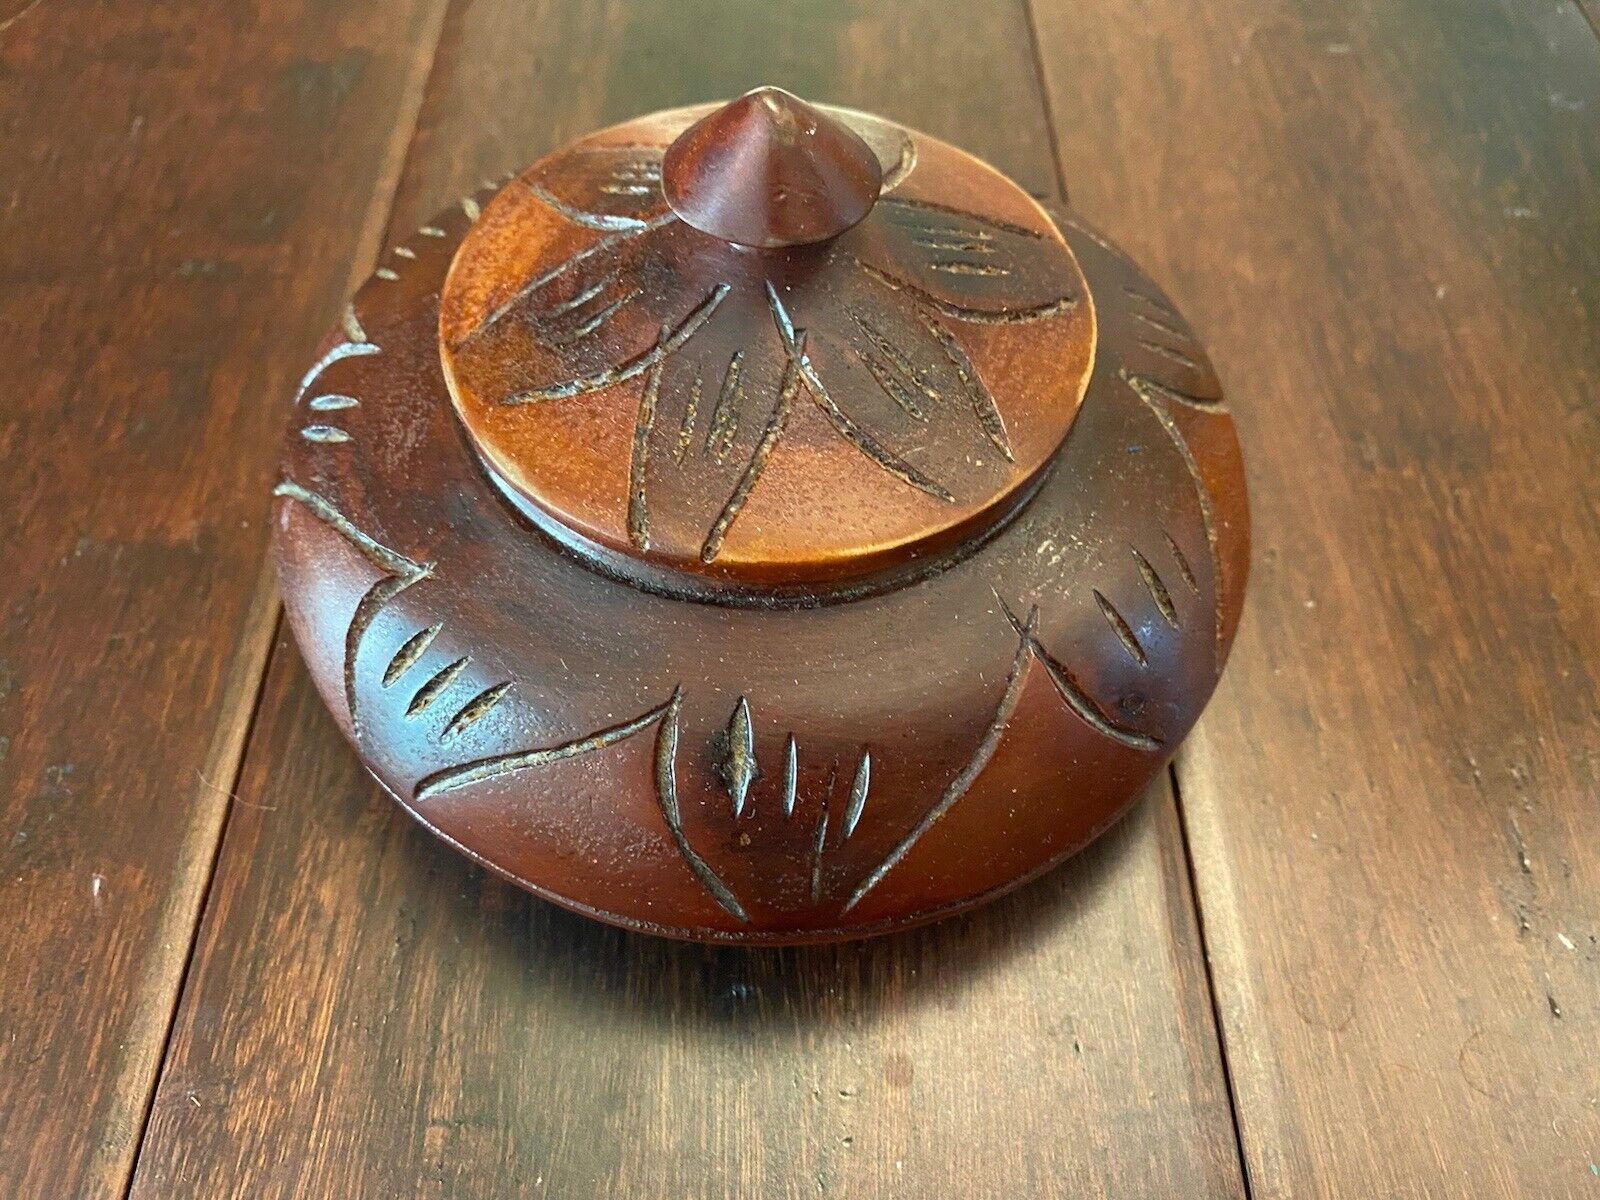 Handmade Haiti Wooden Box for Jewelry, Trinkets, Valuables Storage Collection #4